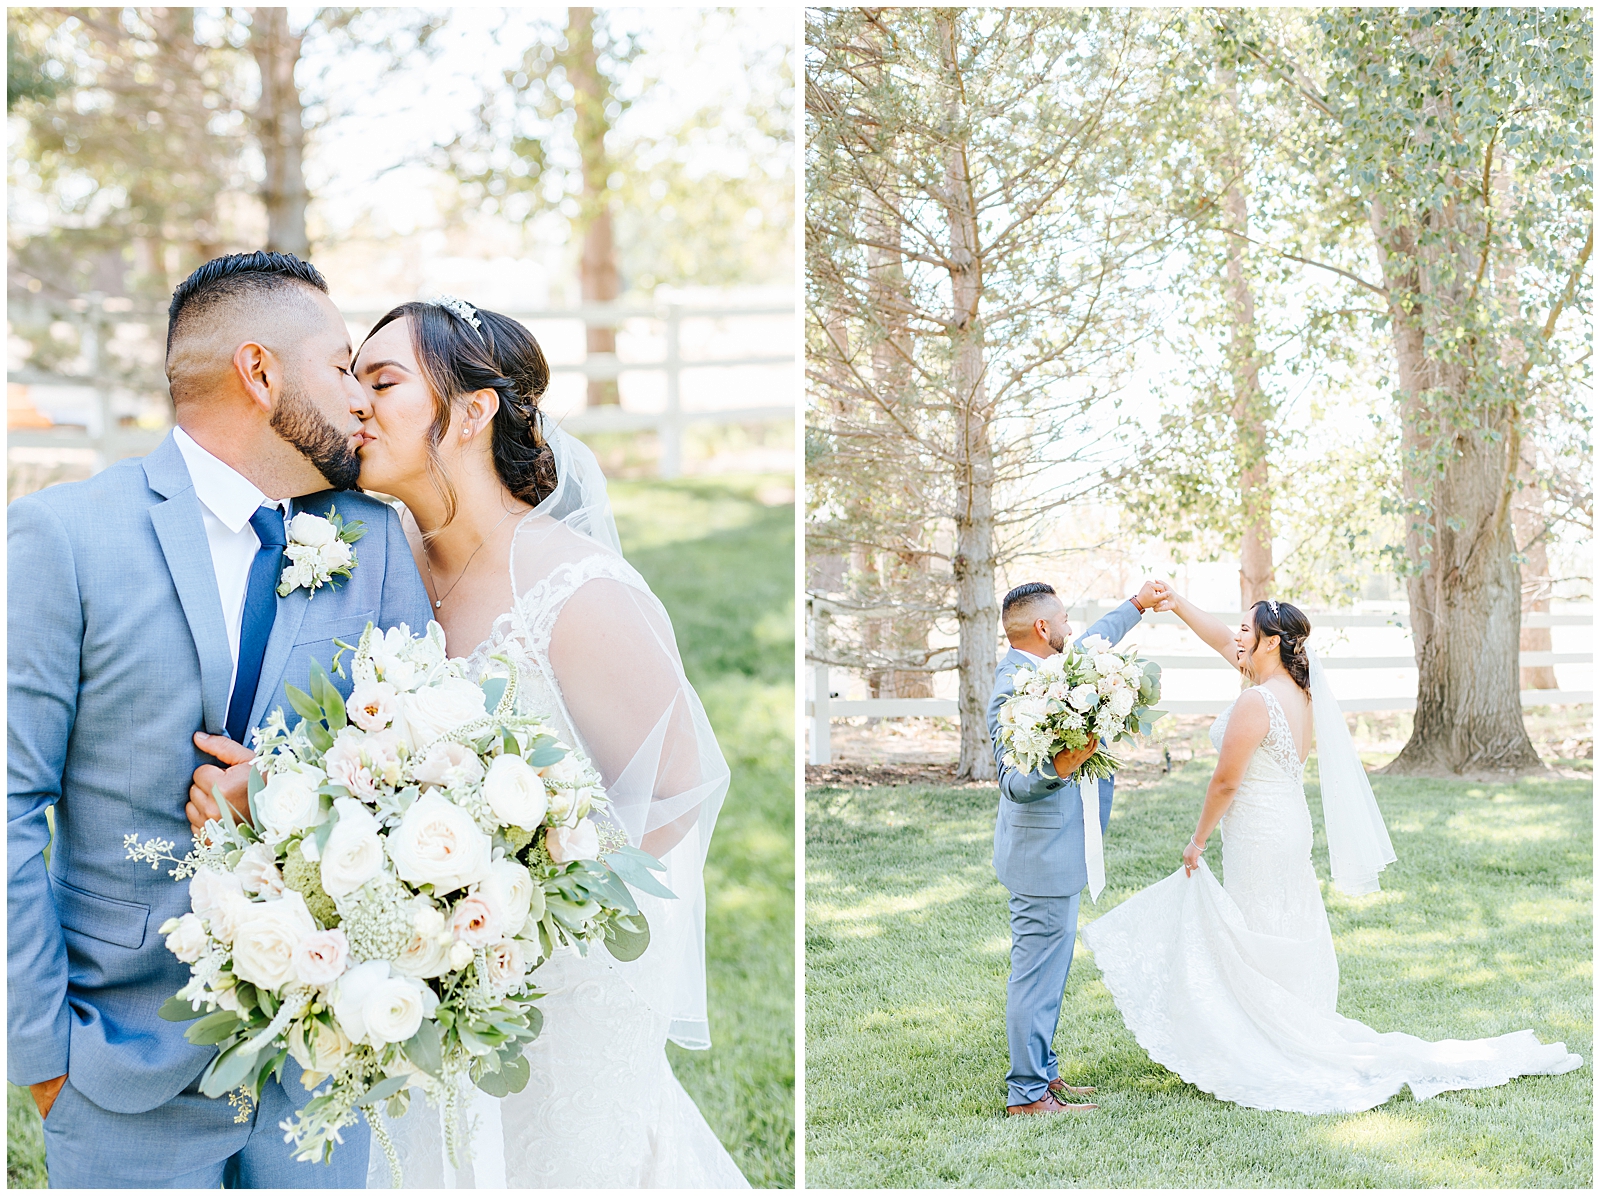 How to Pose a Bride and Groom - Twirling and Kissing